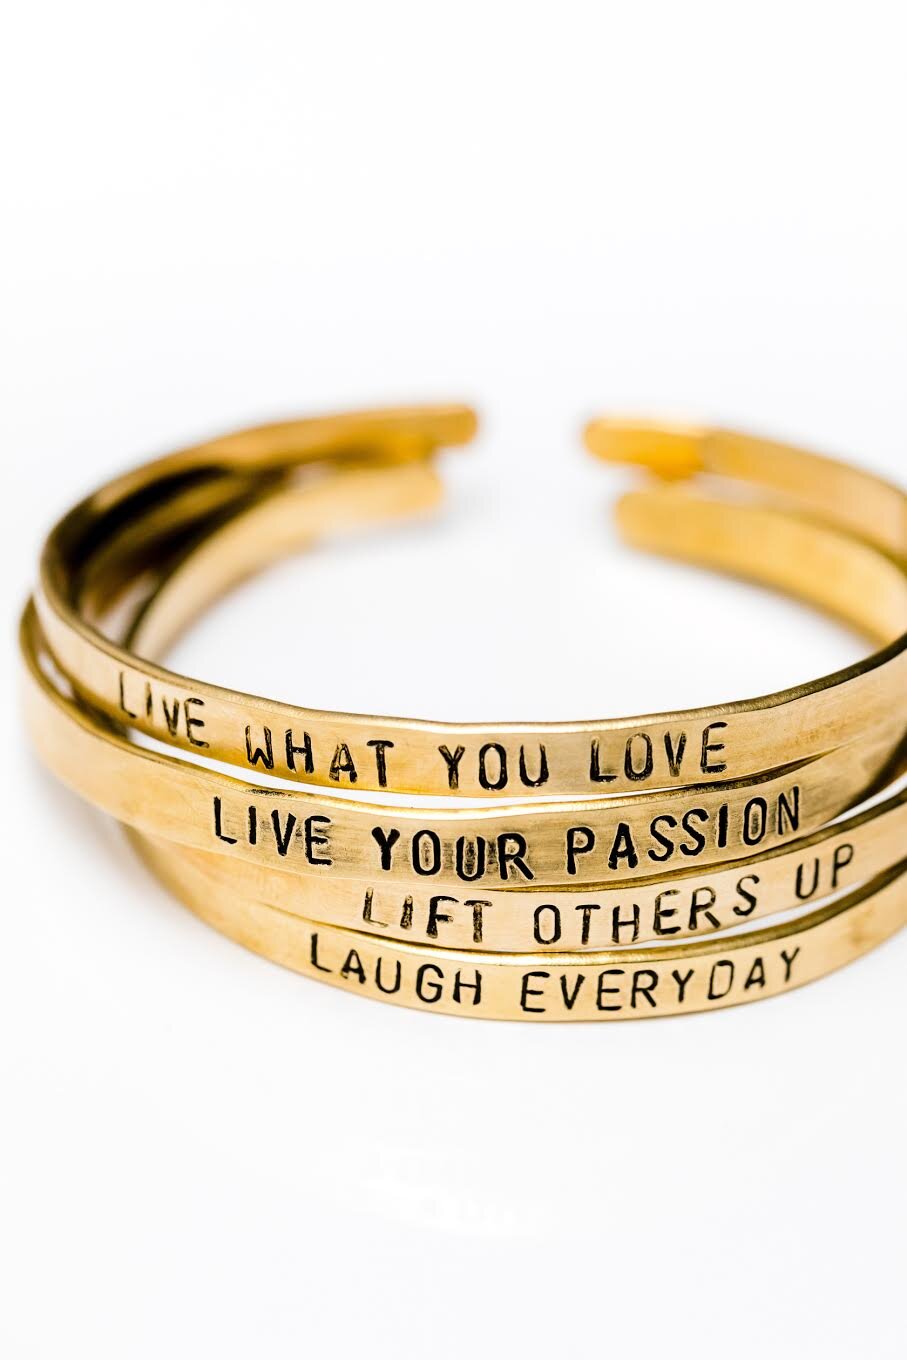 bracelets with inspiring sayings on them